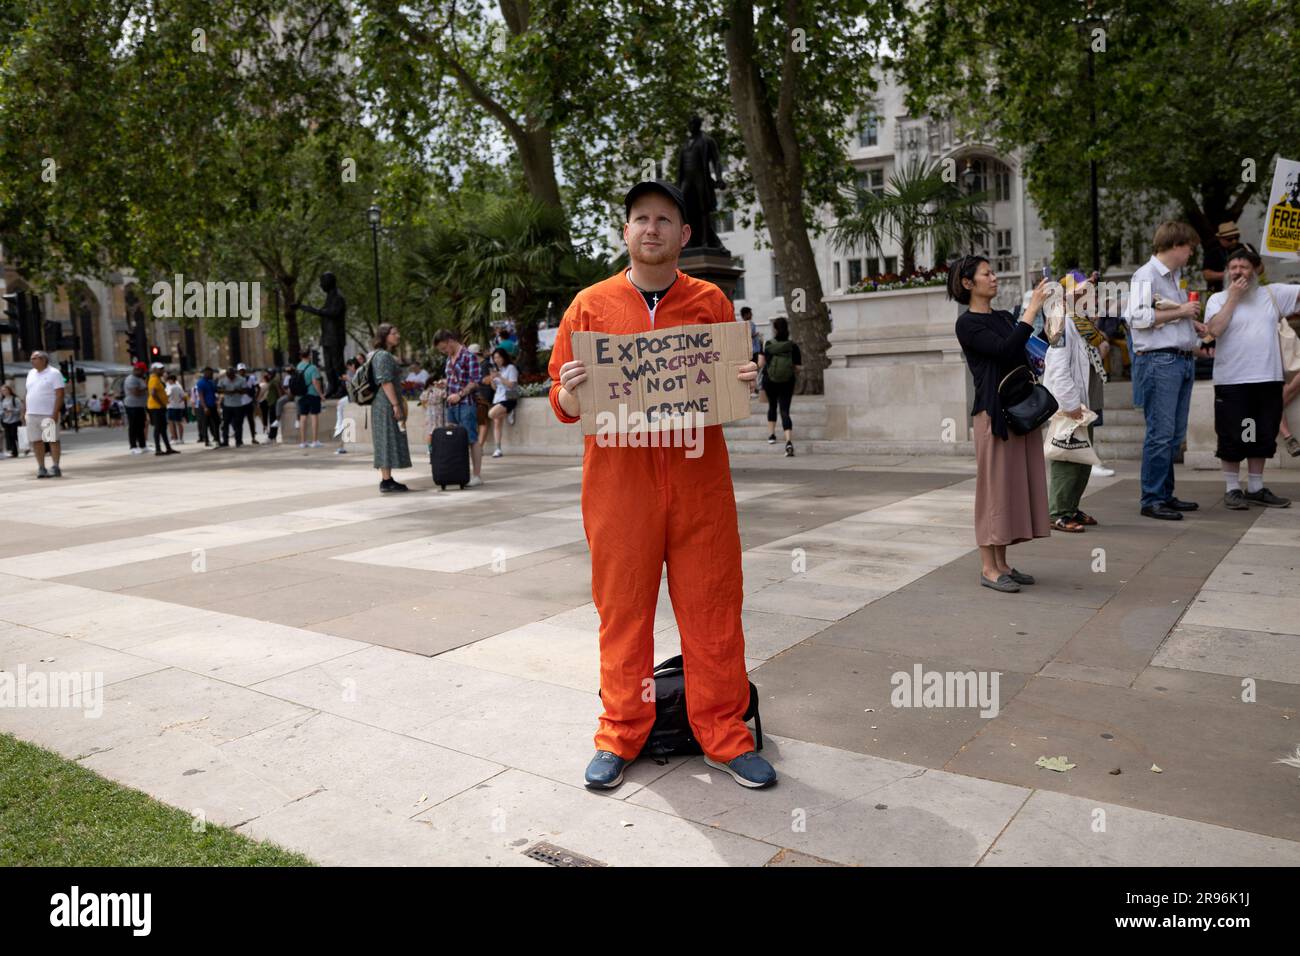 London, UK. 24th June, 2023. A supporter is seen wearing a prisoner costume and holding a placard in solidarity with Julian Assange during the demonstration. Supporters of Julian Assange, an Australian editor who found WikiLeak, protest to urge the UK government to release him from Belmarsh Prison and stop extraditing him to the US. Credit: SOPA Images Limited/Alamy Live News Stock Photo